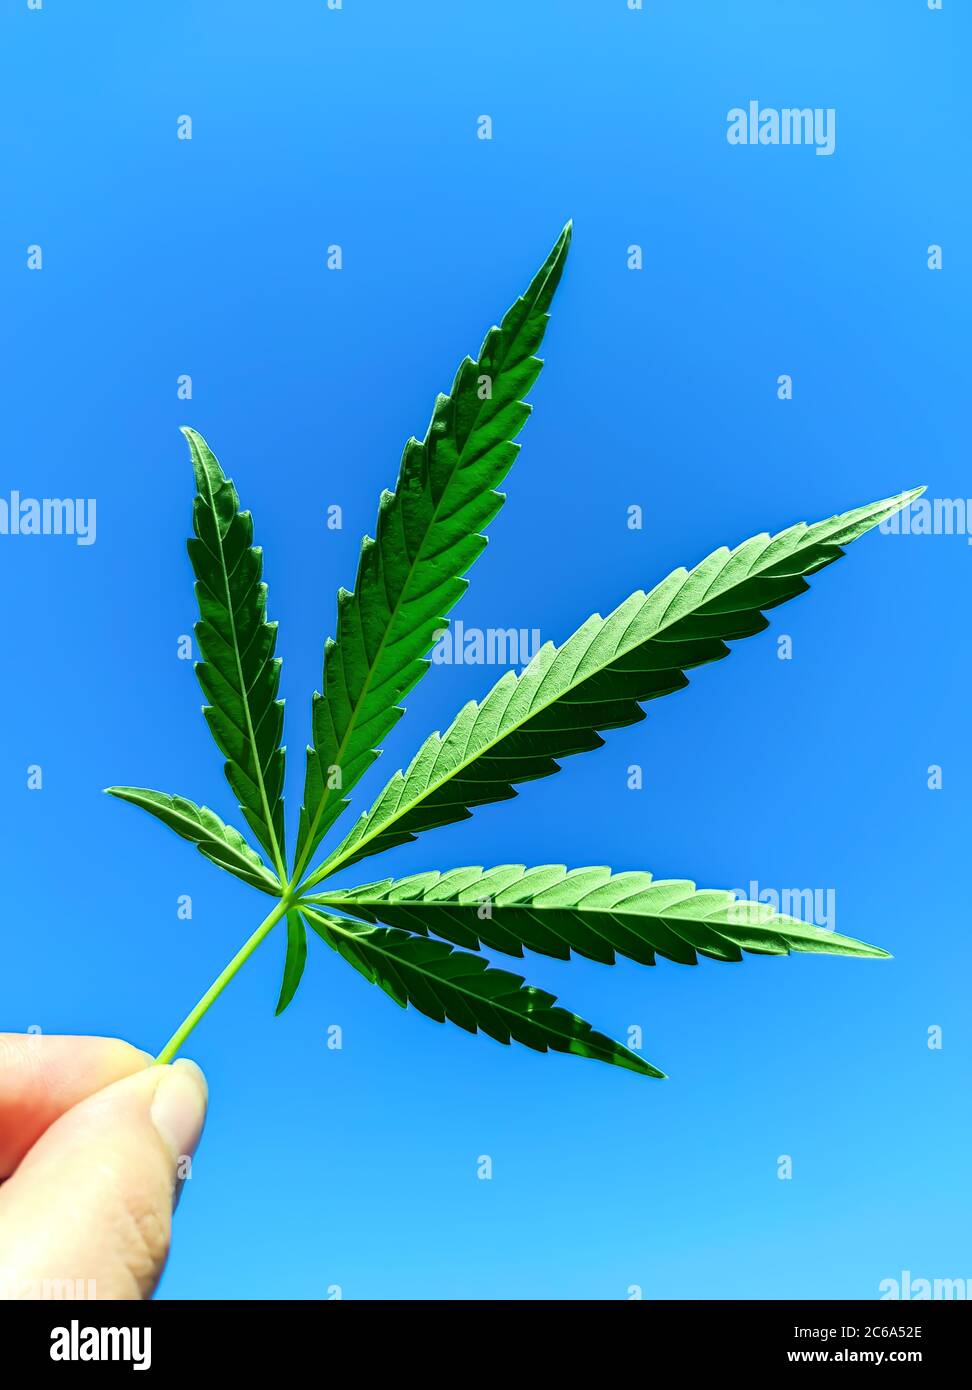 green leaf of hemp is lit by the sun against the blue sky in the hand Stock Photo